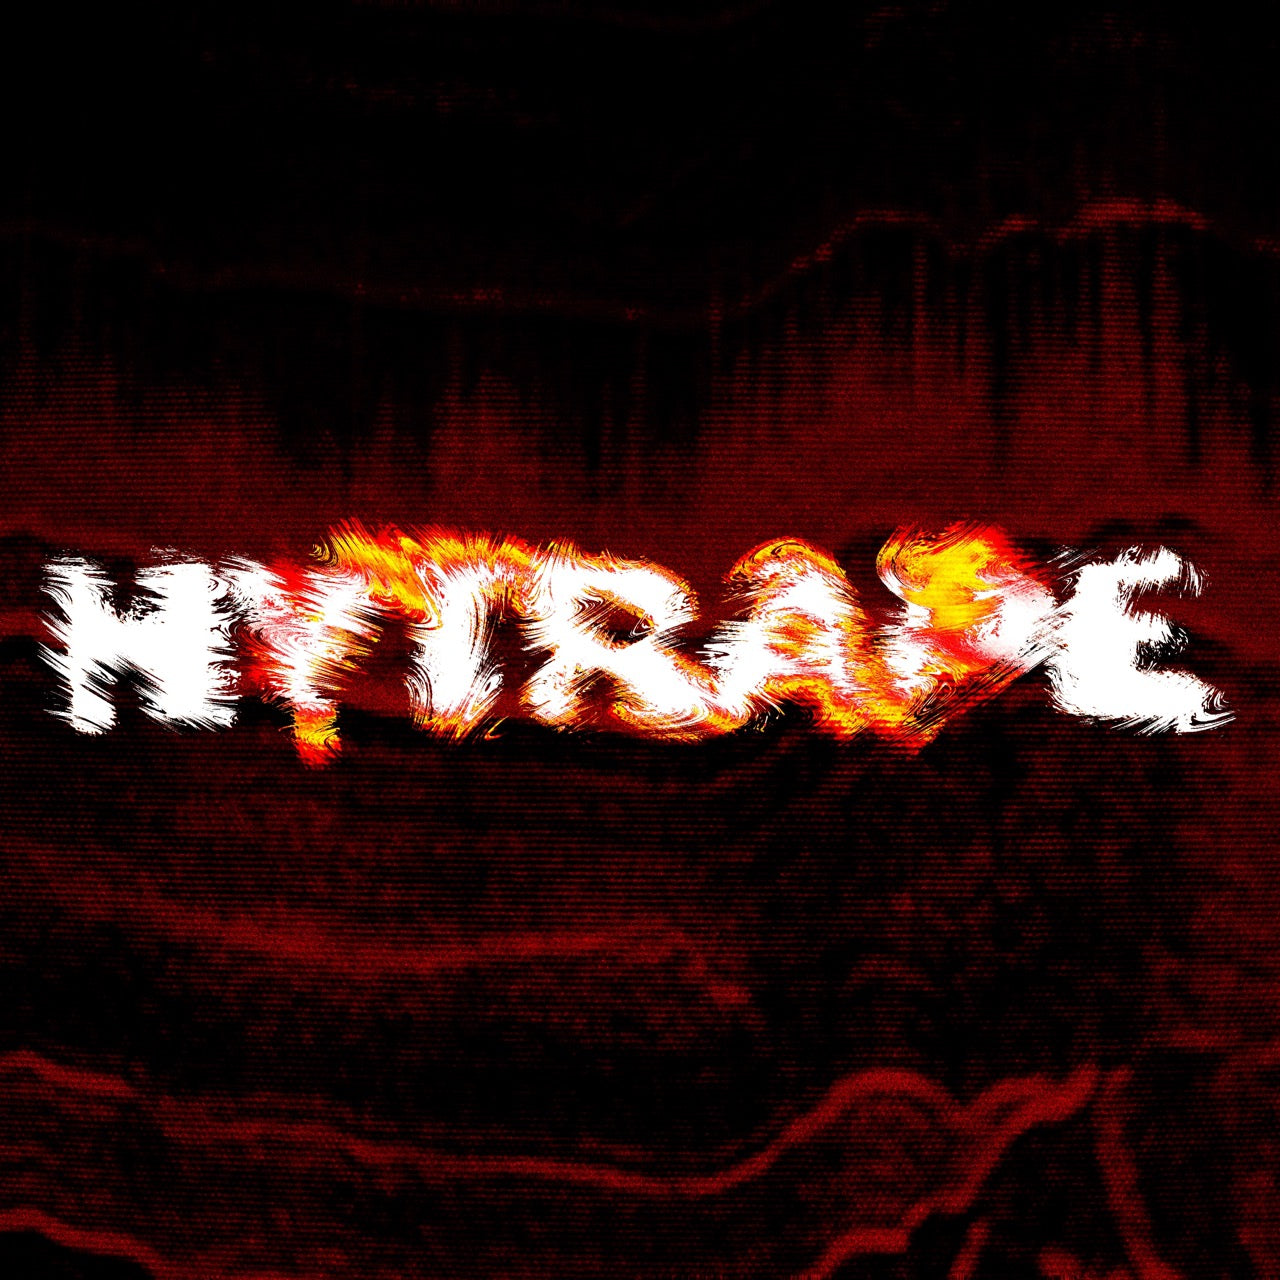 ABSTRACT BURN TEXT EFFECT HYTRAPE